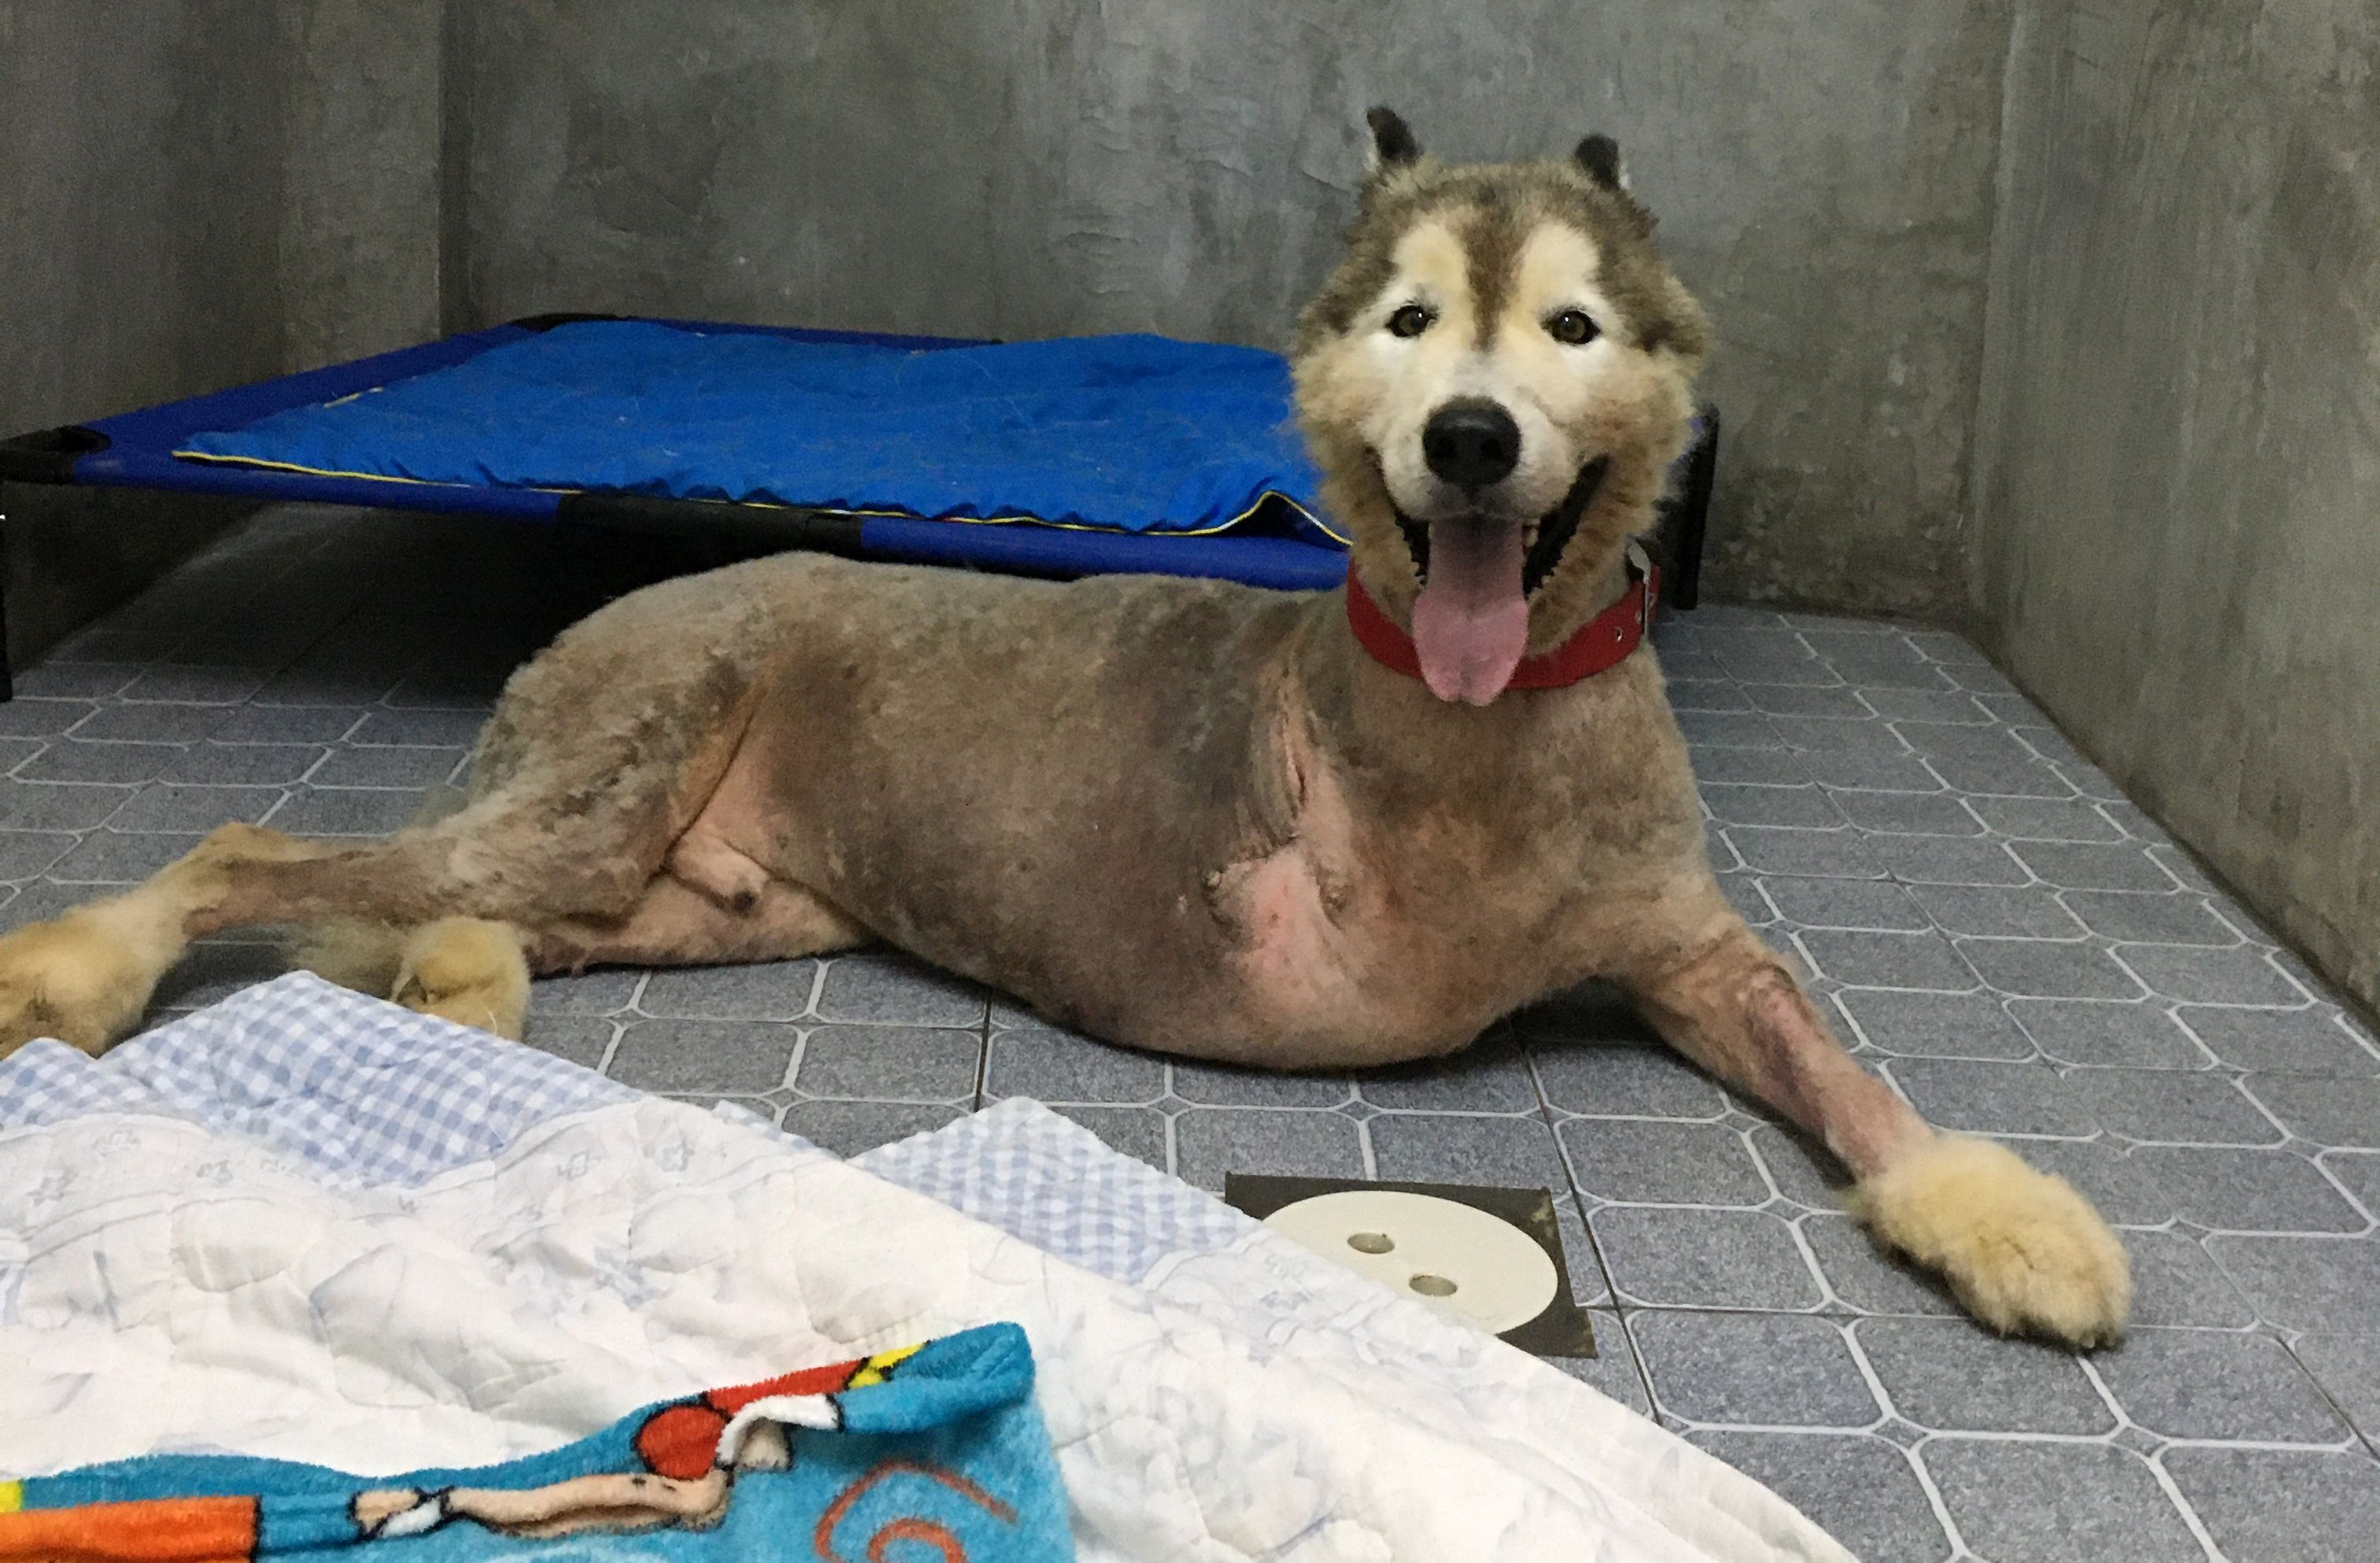 Thailand: An abandoned Alaskan Malamute gets a second chance at life